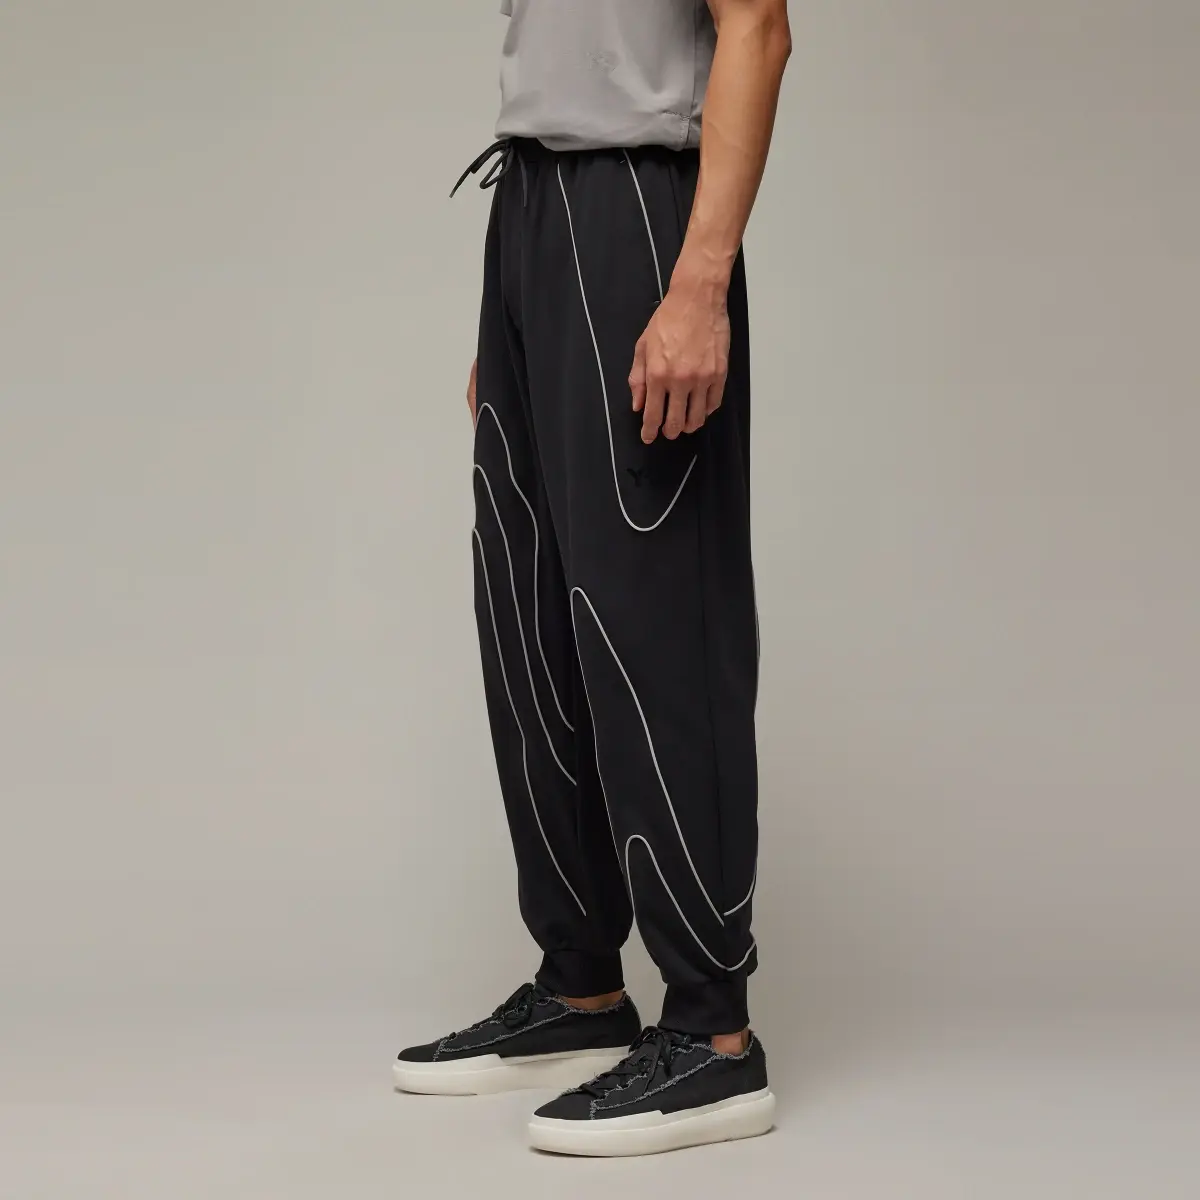 Adidas Y-3 Tracksuit Bottoms. 2